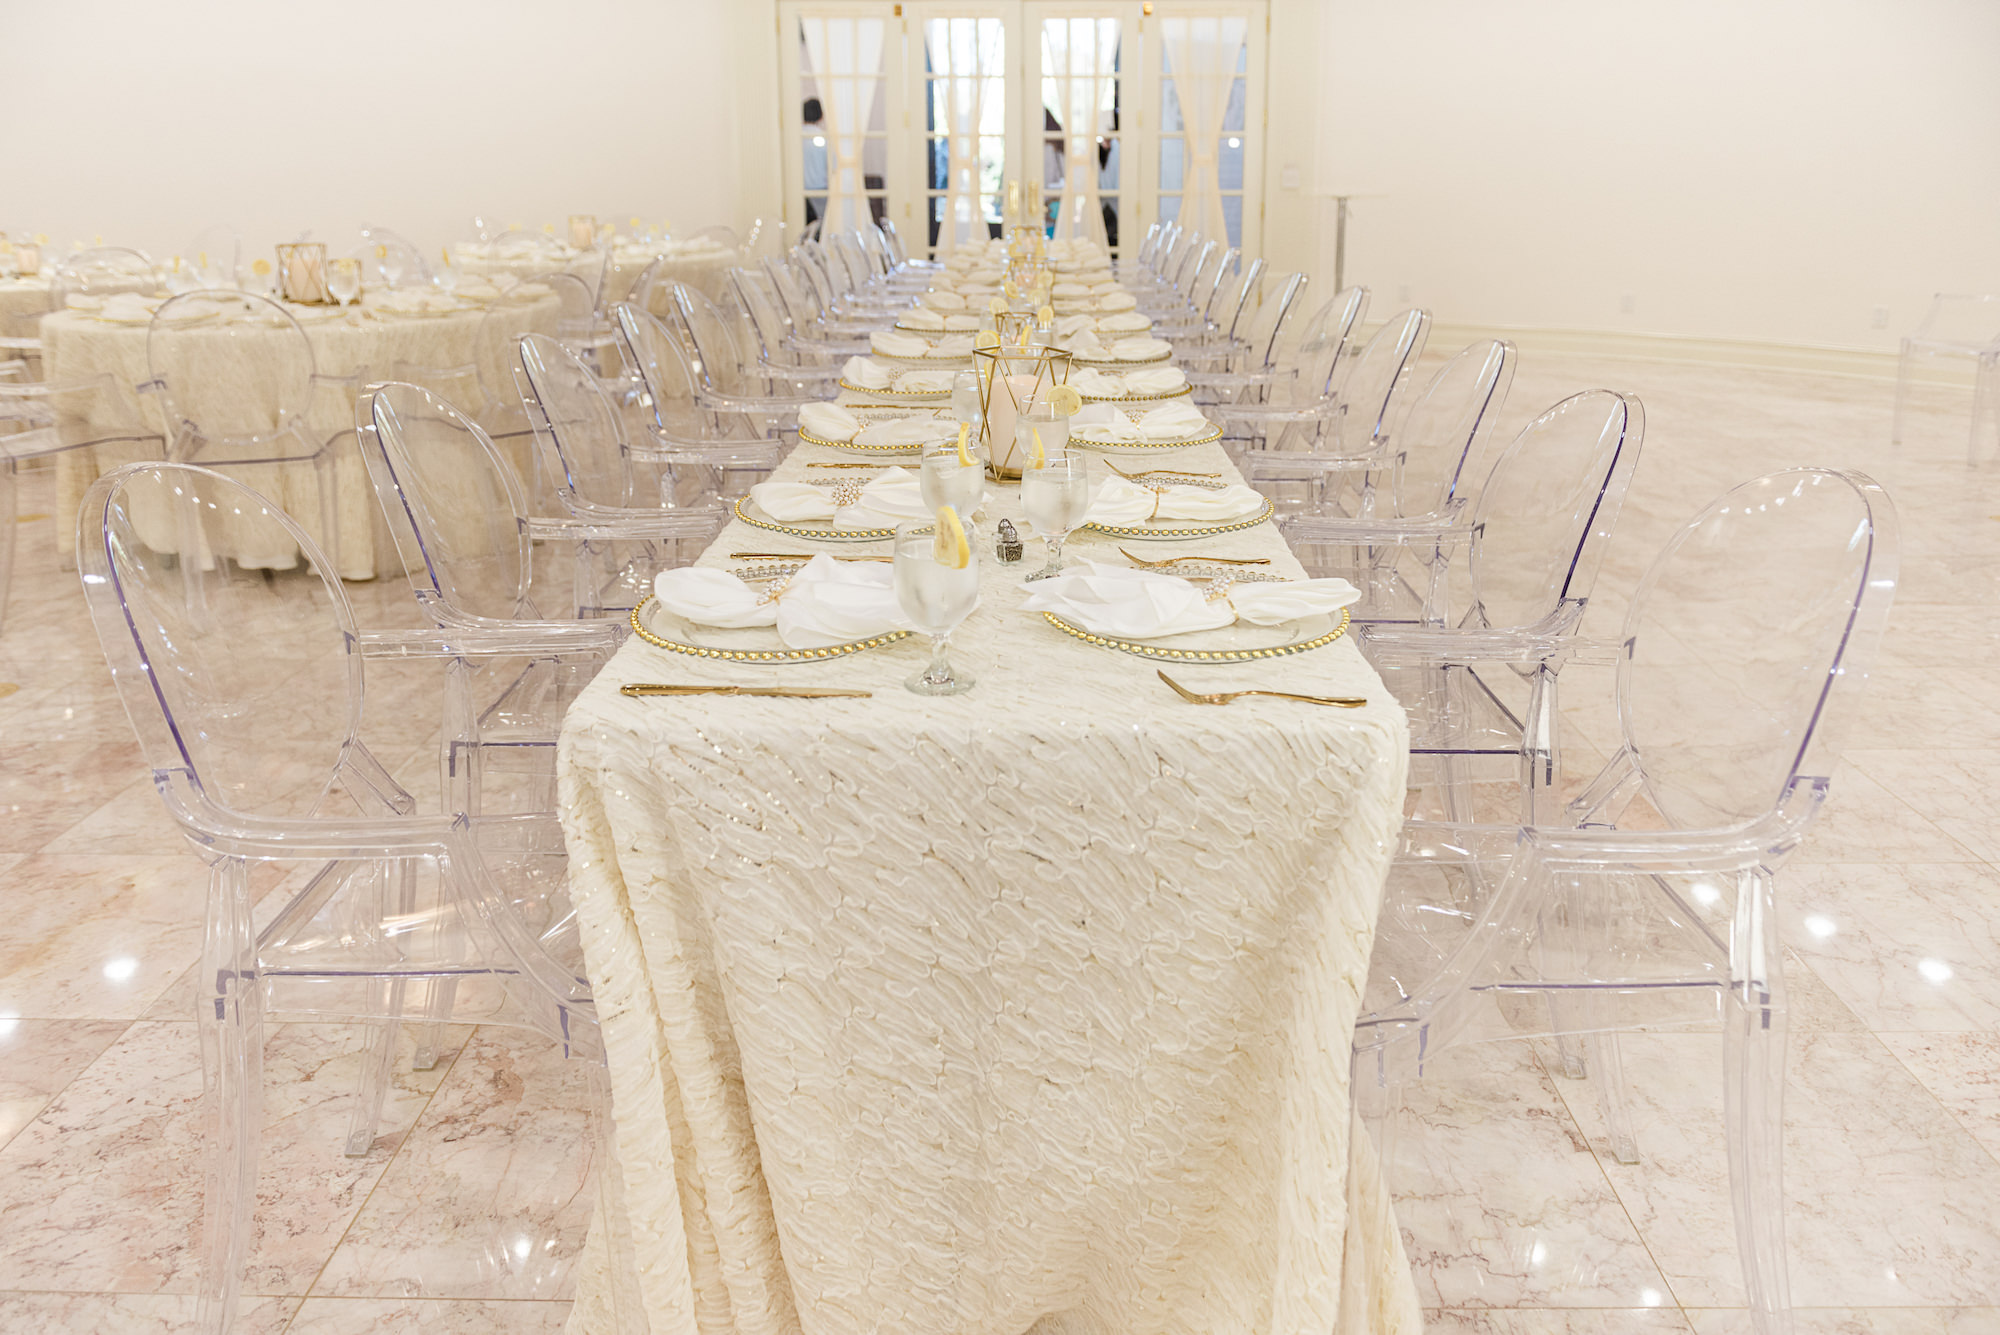 Elegant Long Feasting Tables with White Linens and Ghost Chairs Inspiration | Gold Beveled Glass Chargers and Votives | Tampa Bay Outside the Box Rentals | Whitehurst Gallery